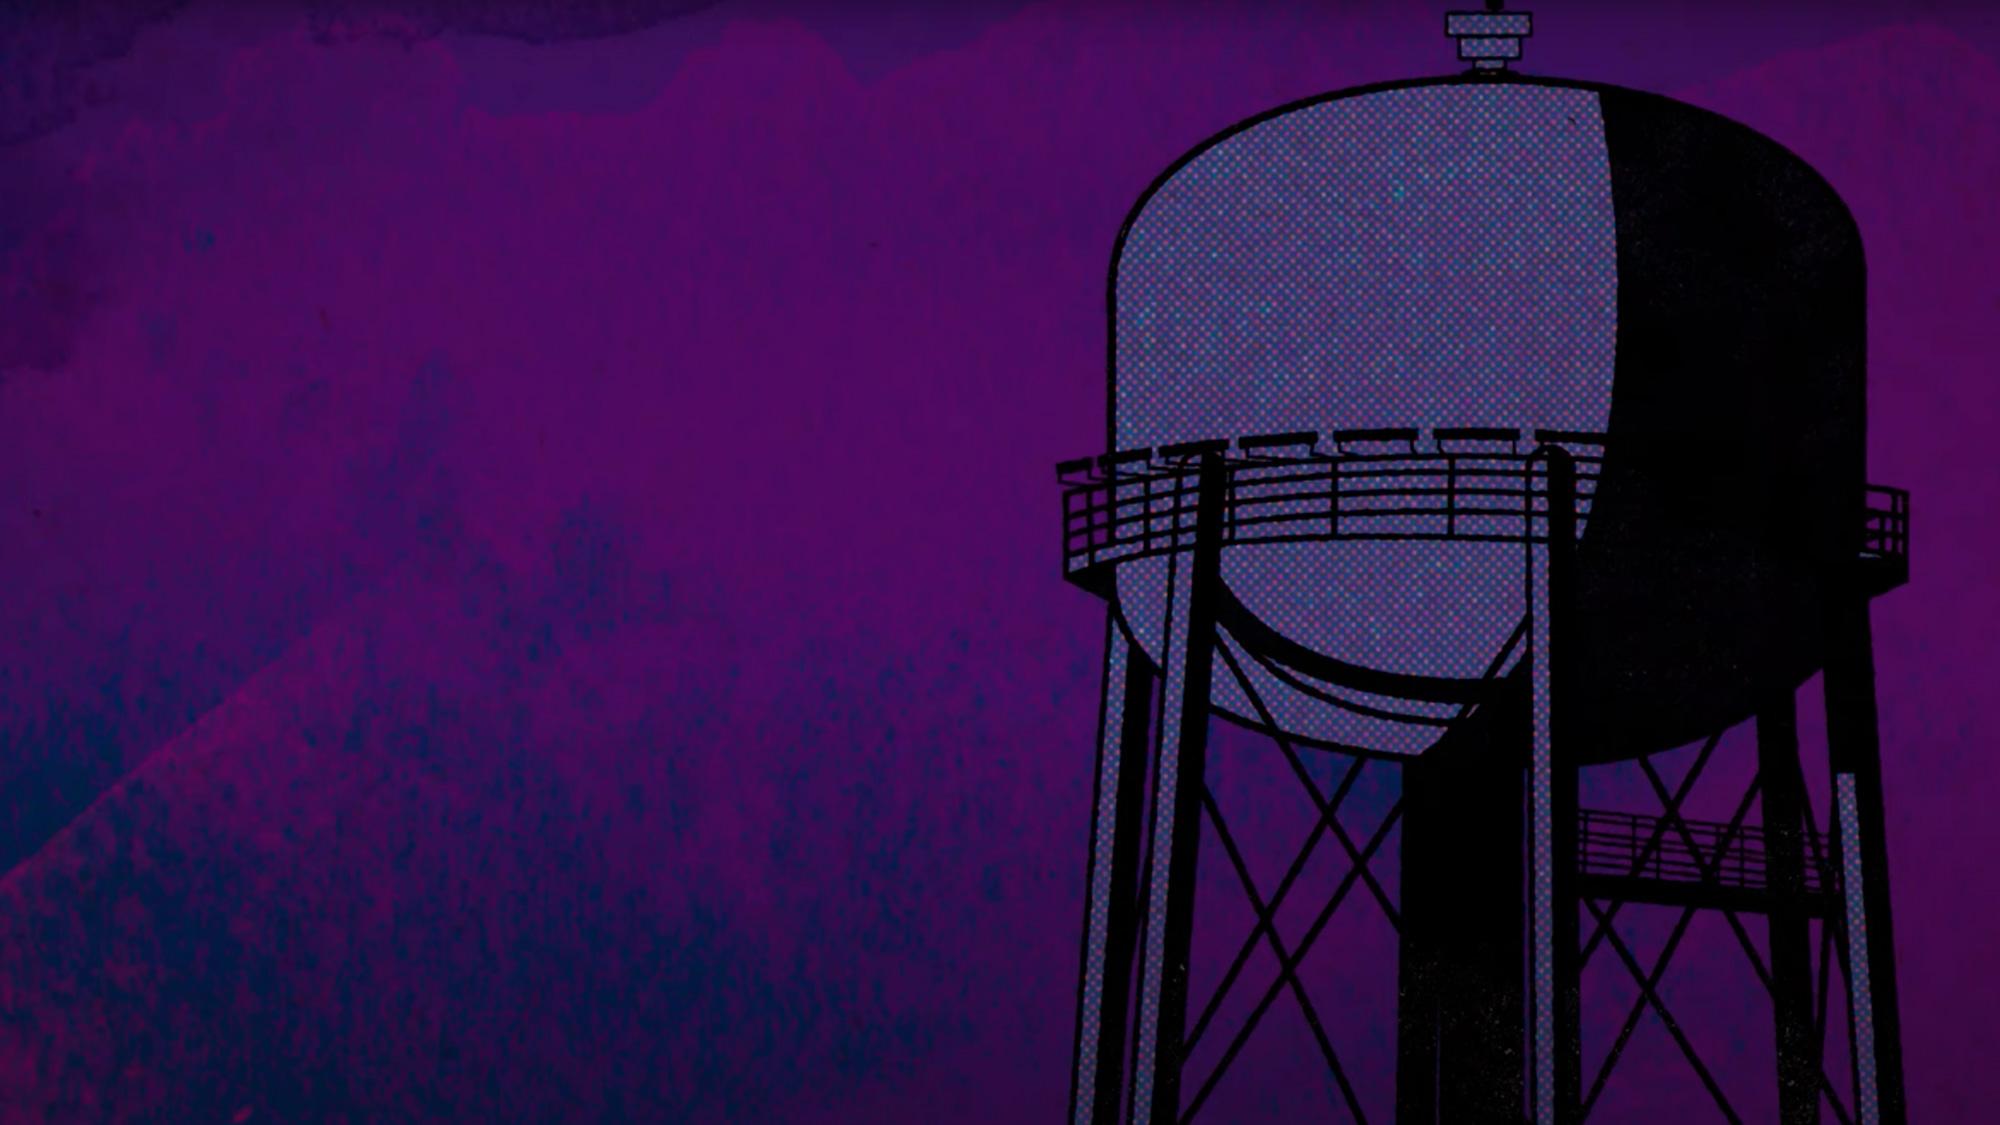 A comic book style illustration of the ֱ water tower